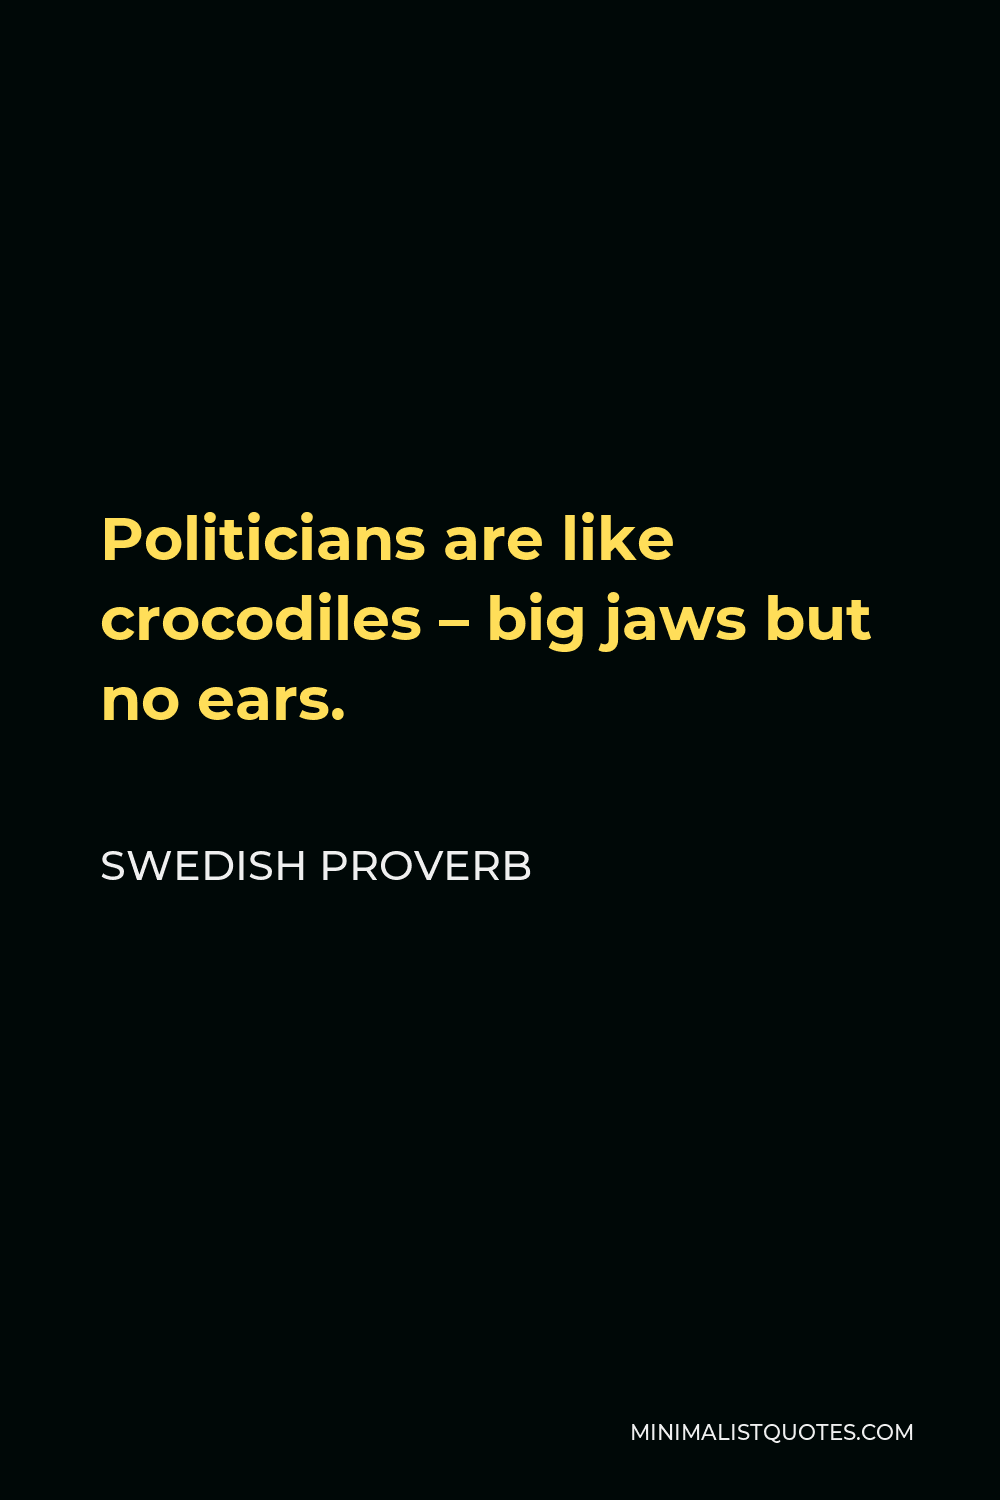 Swedish Proverb Quote - Politicians are like crocodiles – big jaws but no ears.